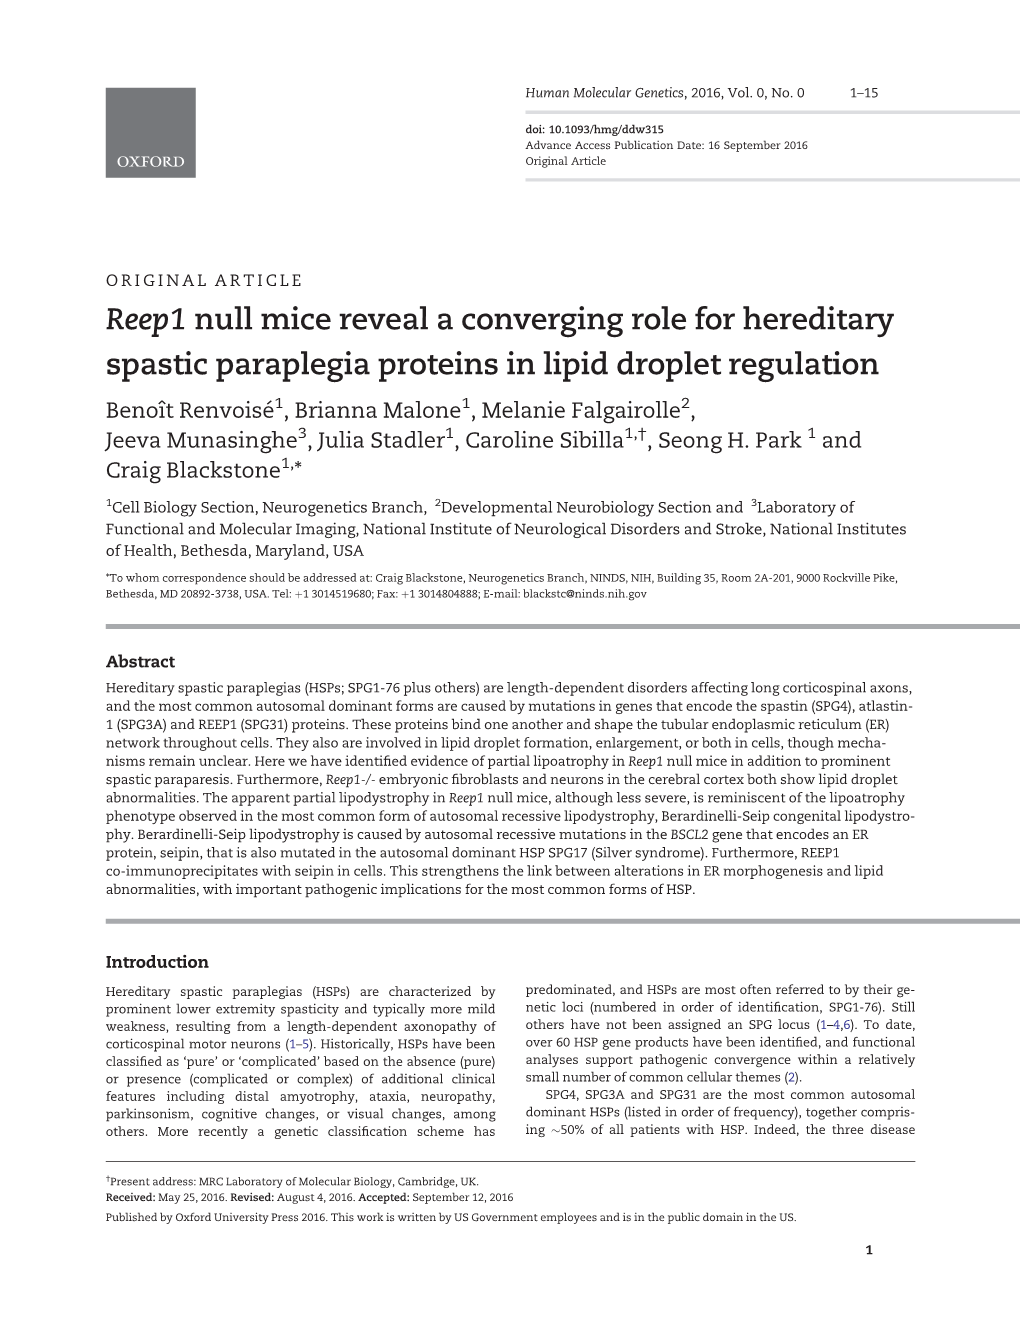 Reep1 Null Mice Reveal a Converging Role for Hereditary Spastic